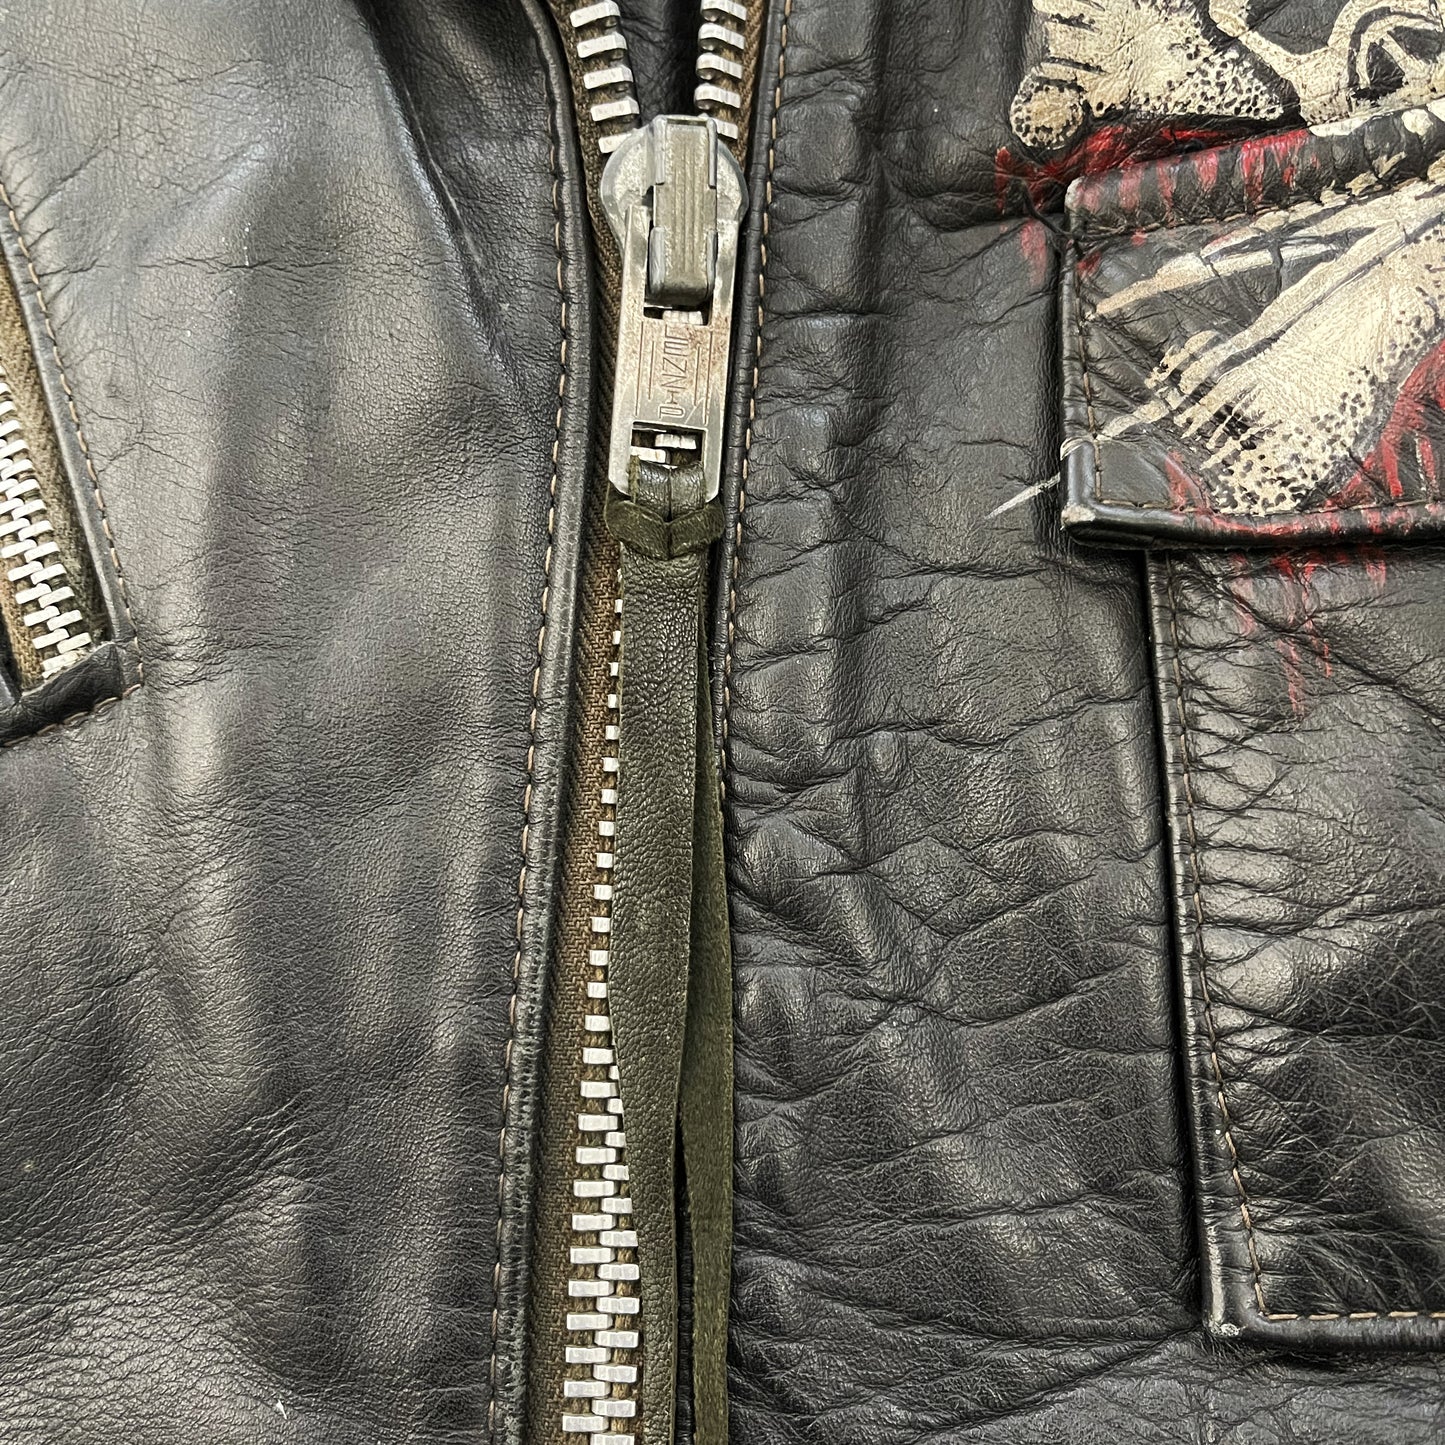 The Great China Wall 'Motor City' Leather Biker Jacket